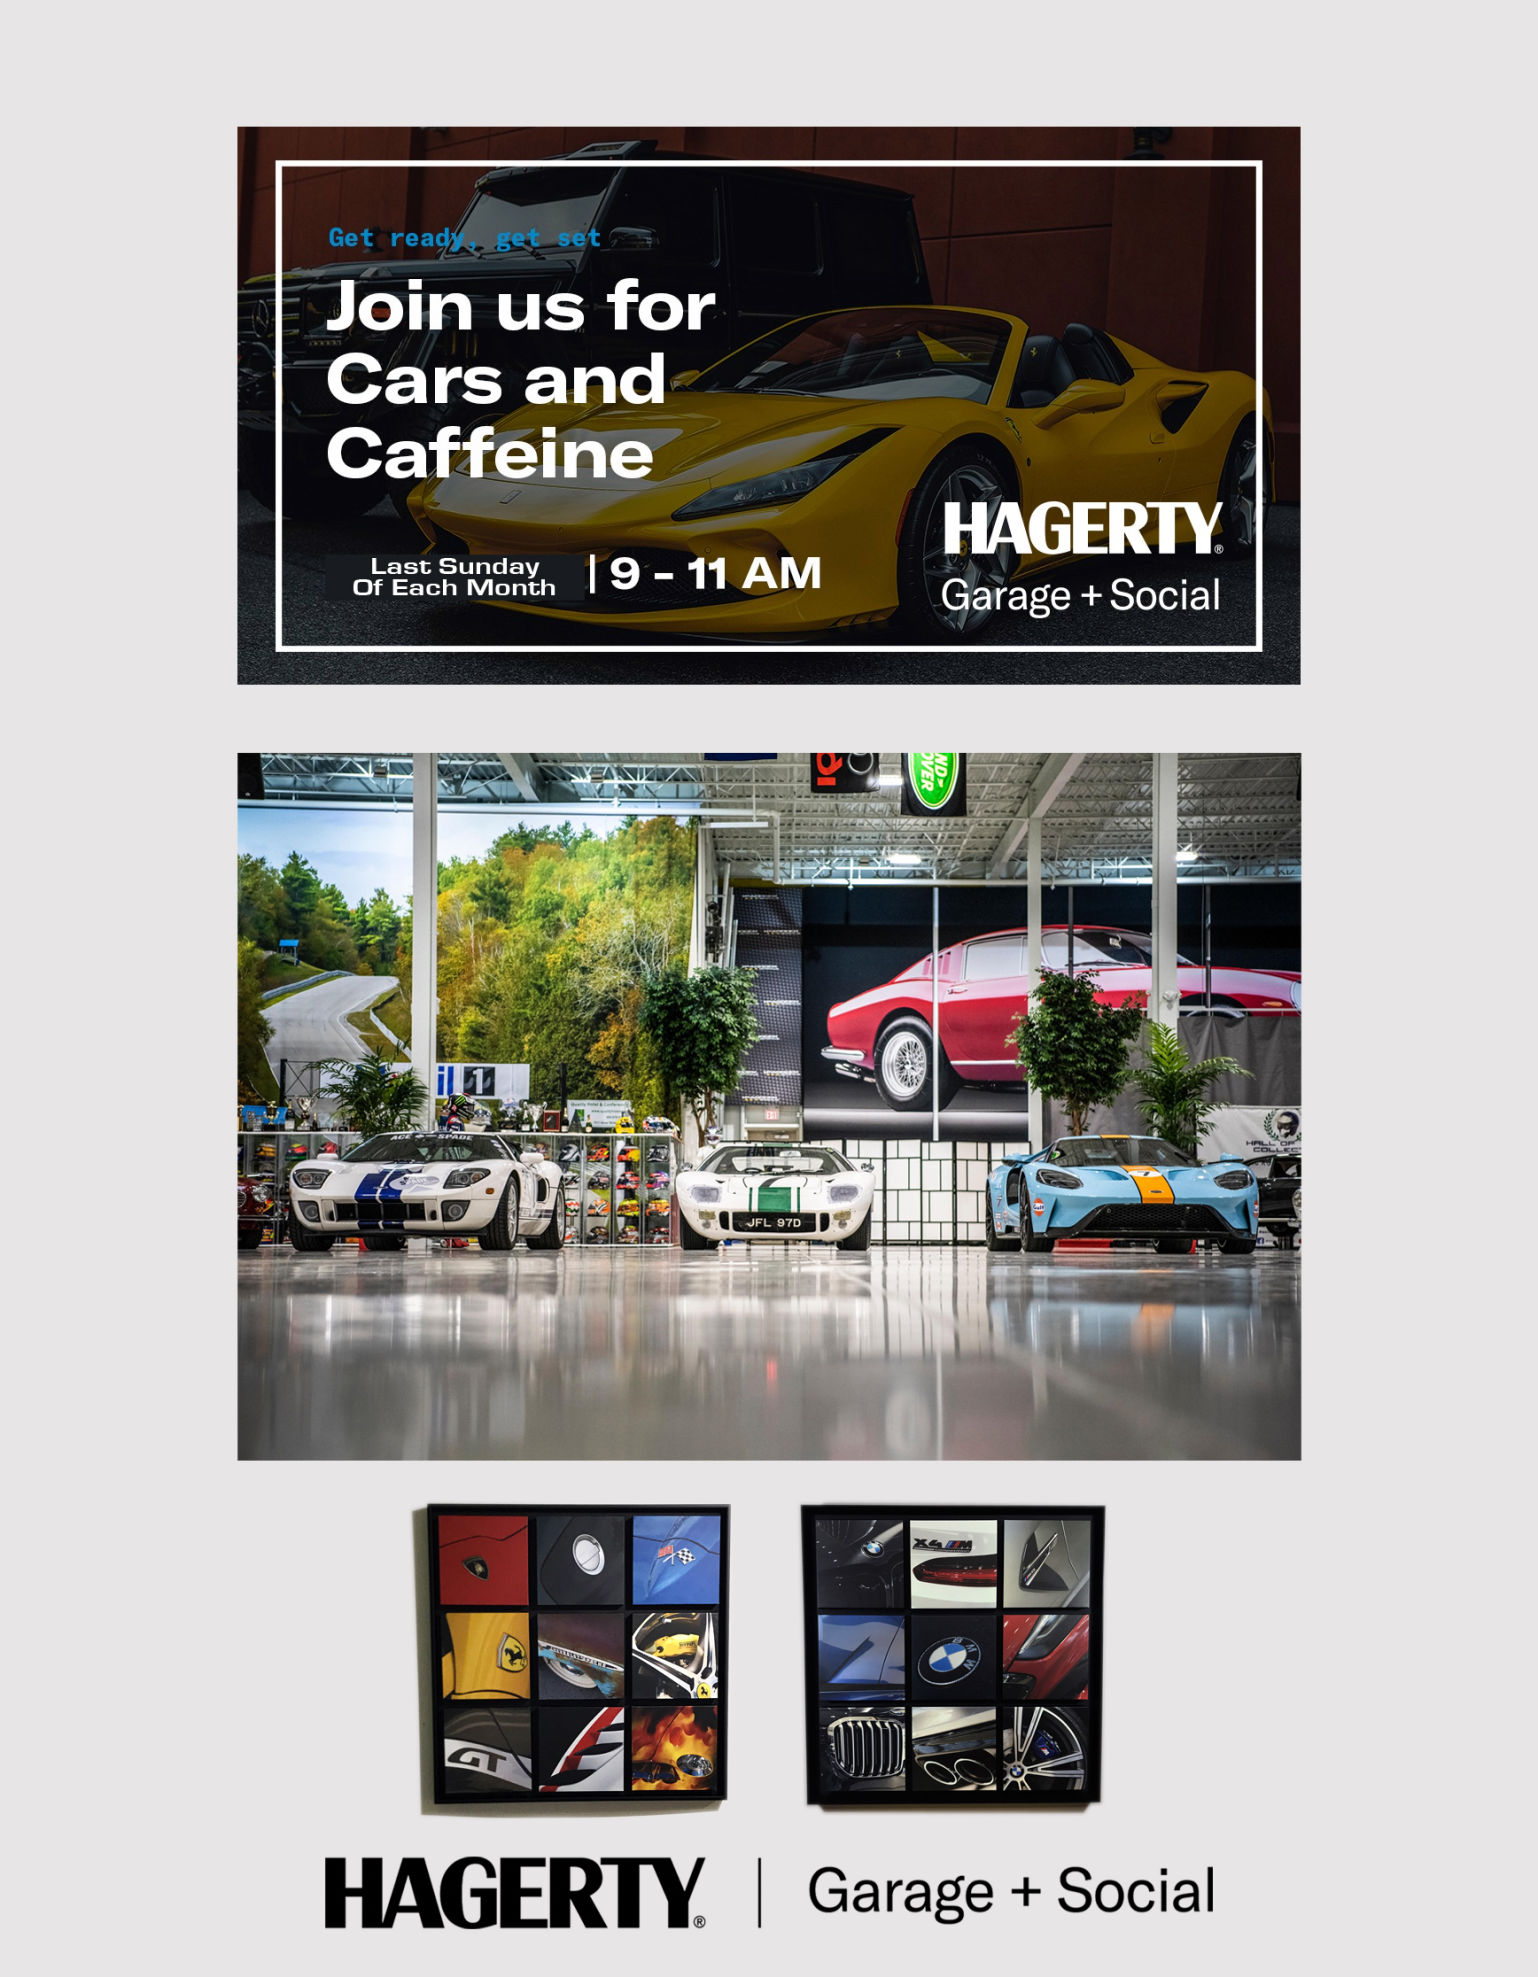 Hagerty Garage + Social Cars and Caffeine Delray Beach